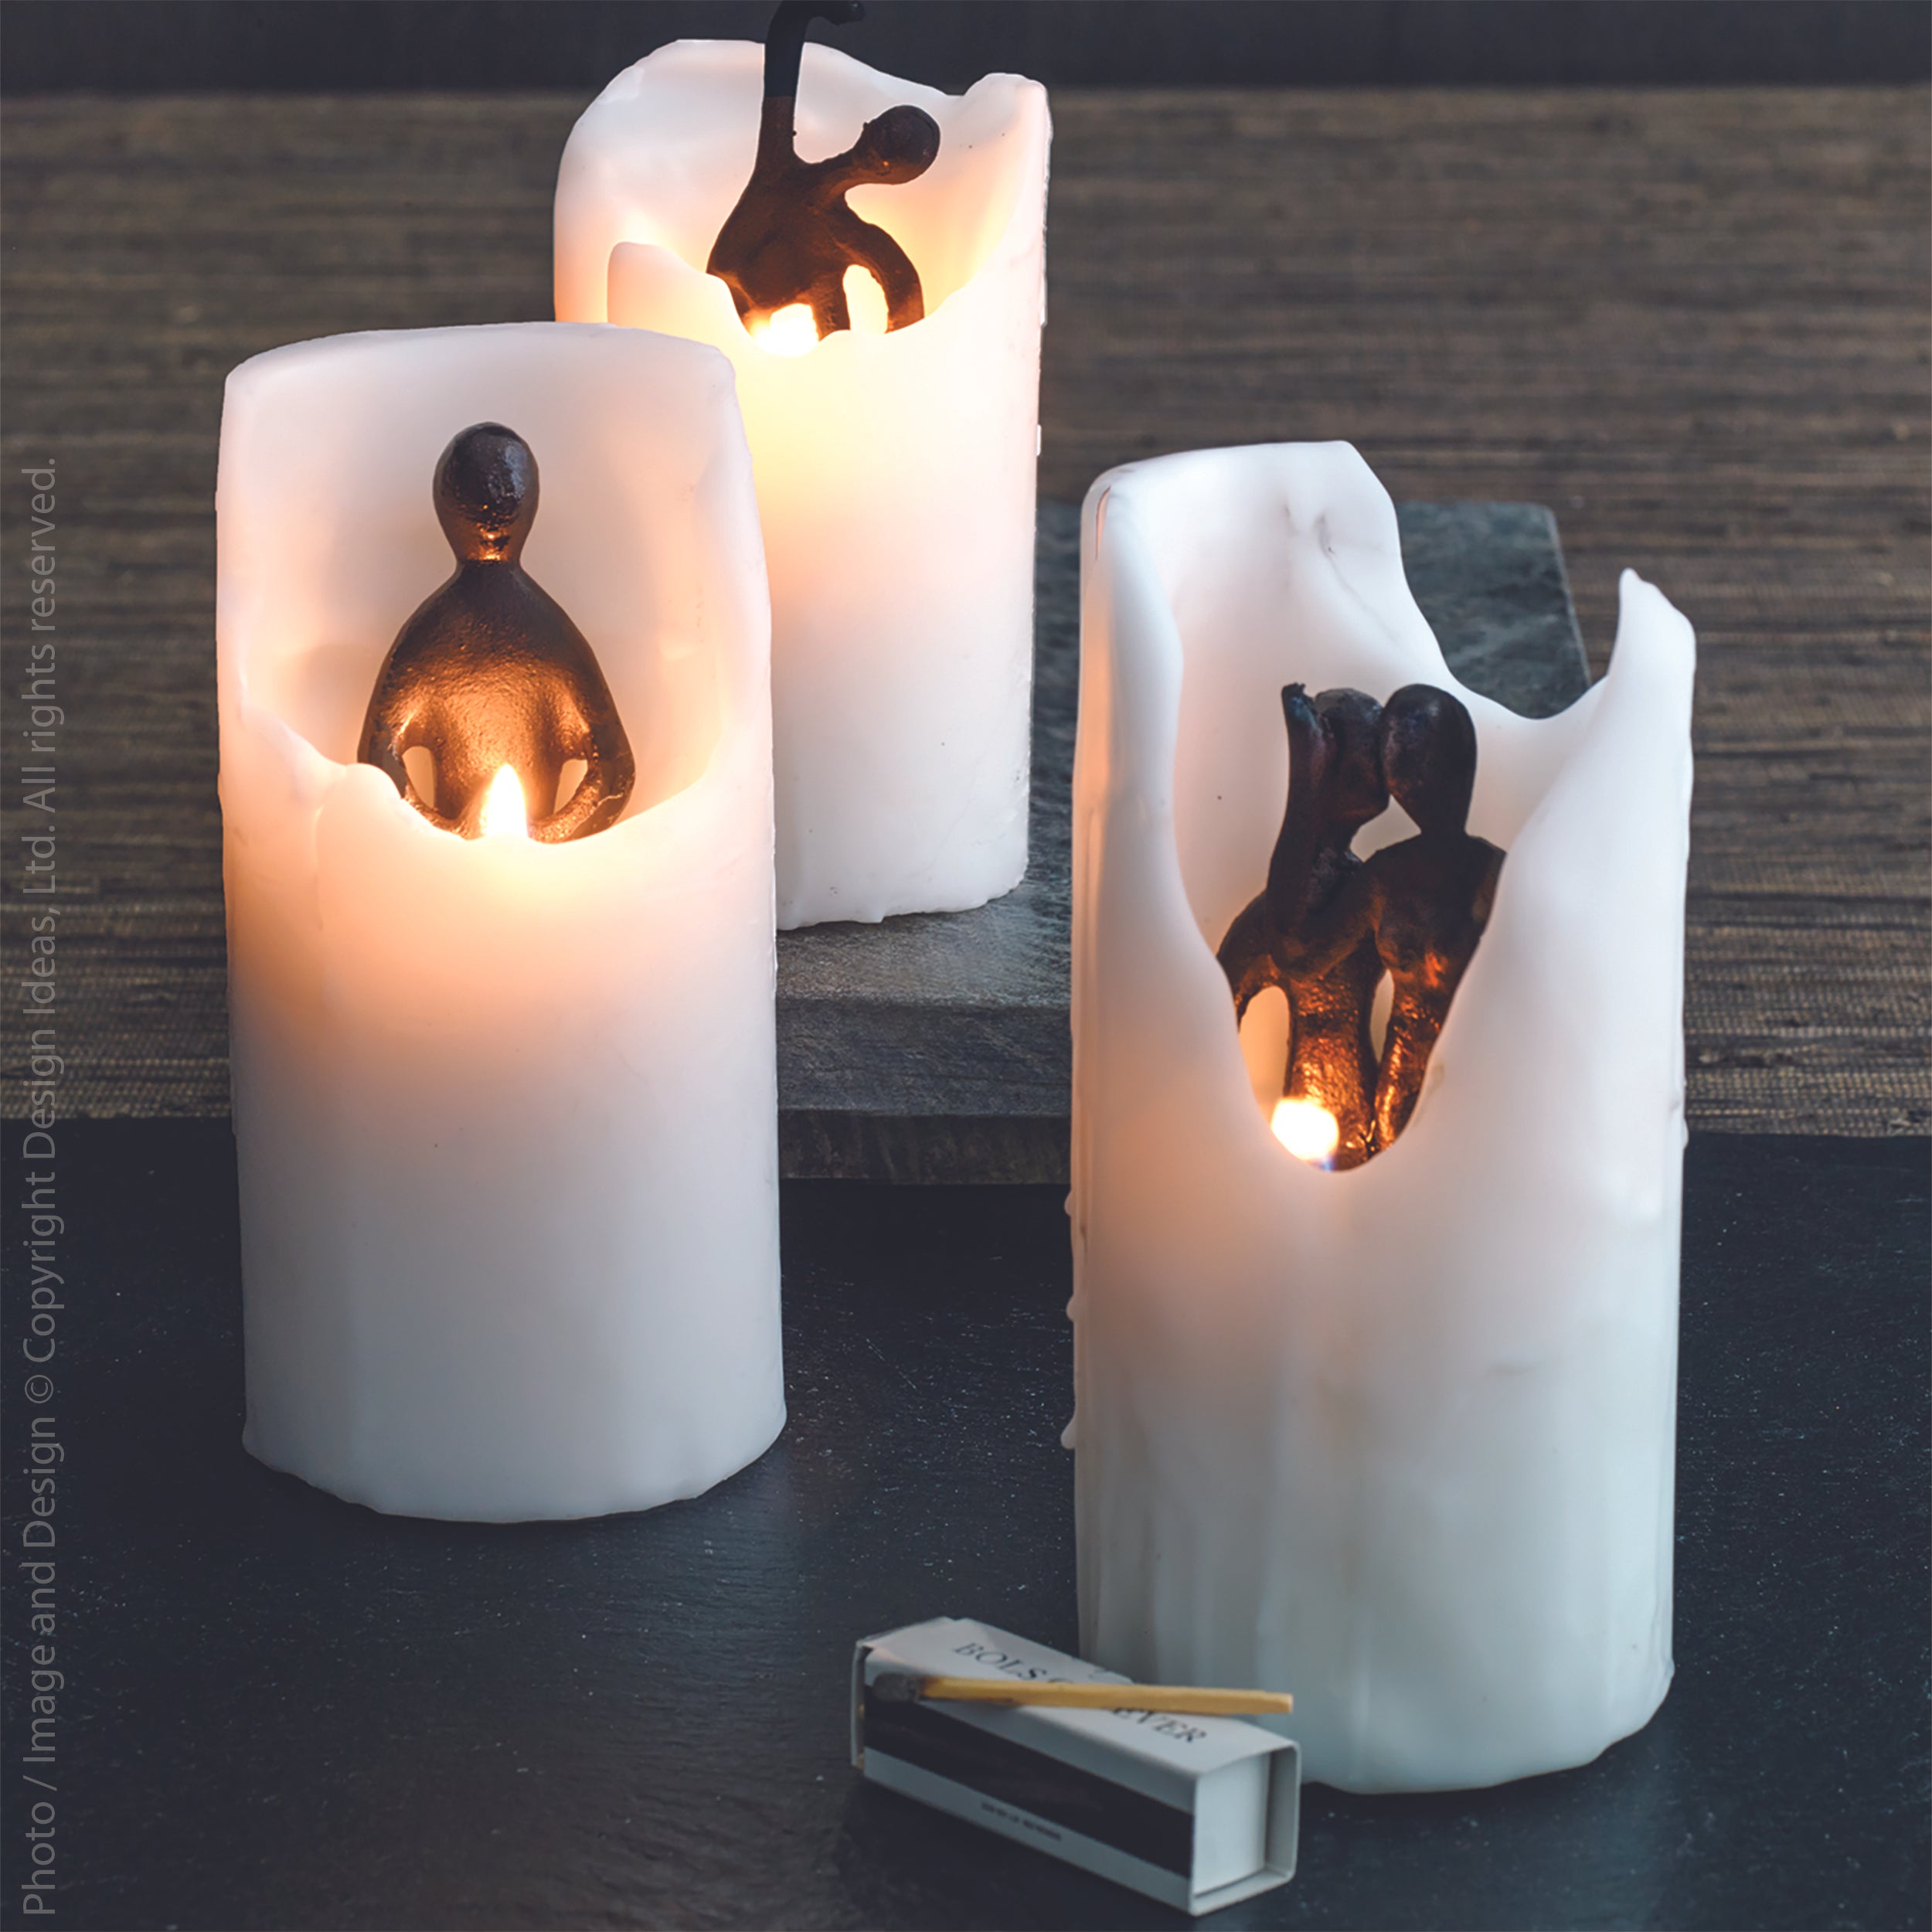 Spirit Zen Cast Iron Candle Natural Color | Image 2 | From the Spirit Collection | Elegantly crafted with natural cast iron for long lasting use | Available in white color | texxture home